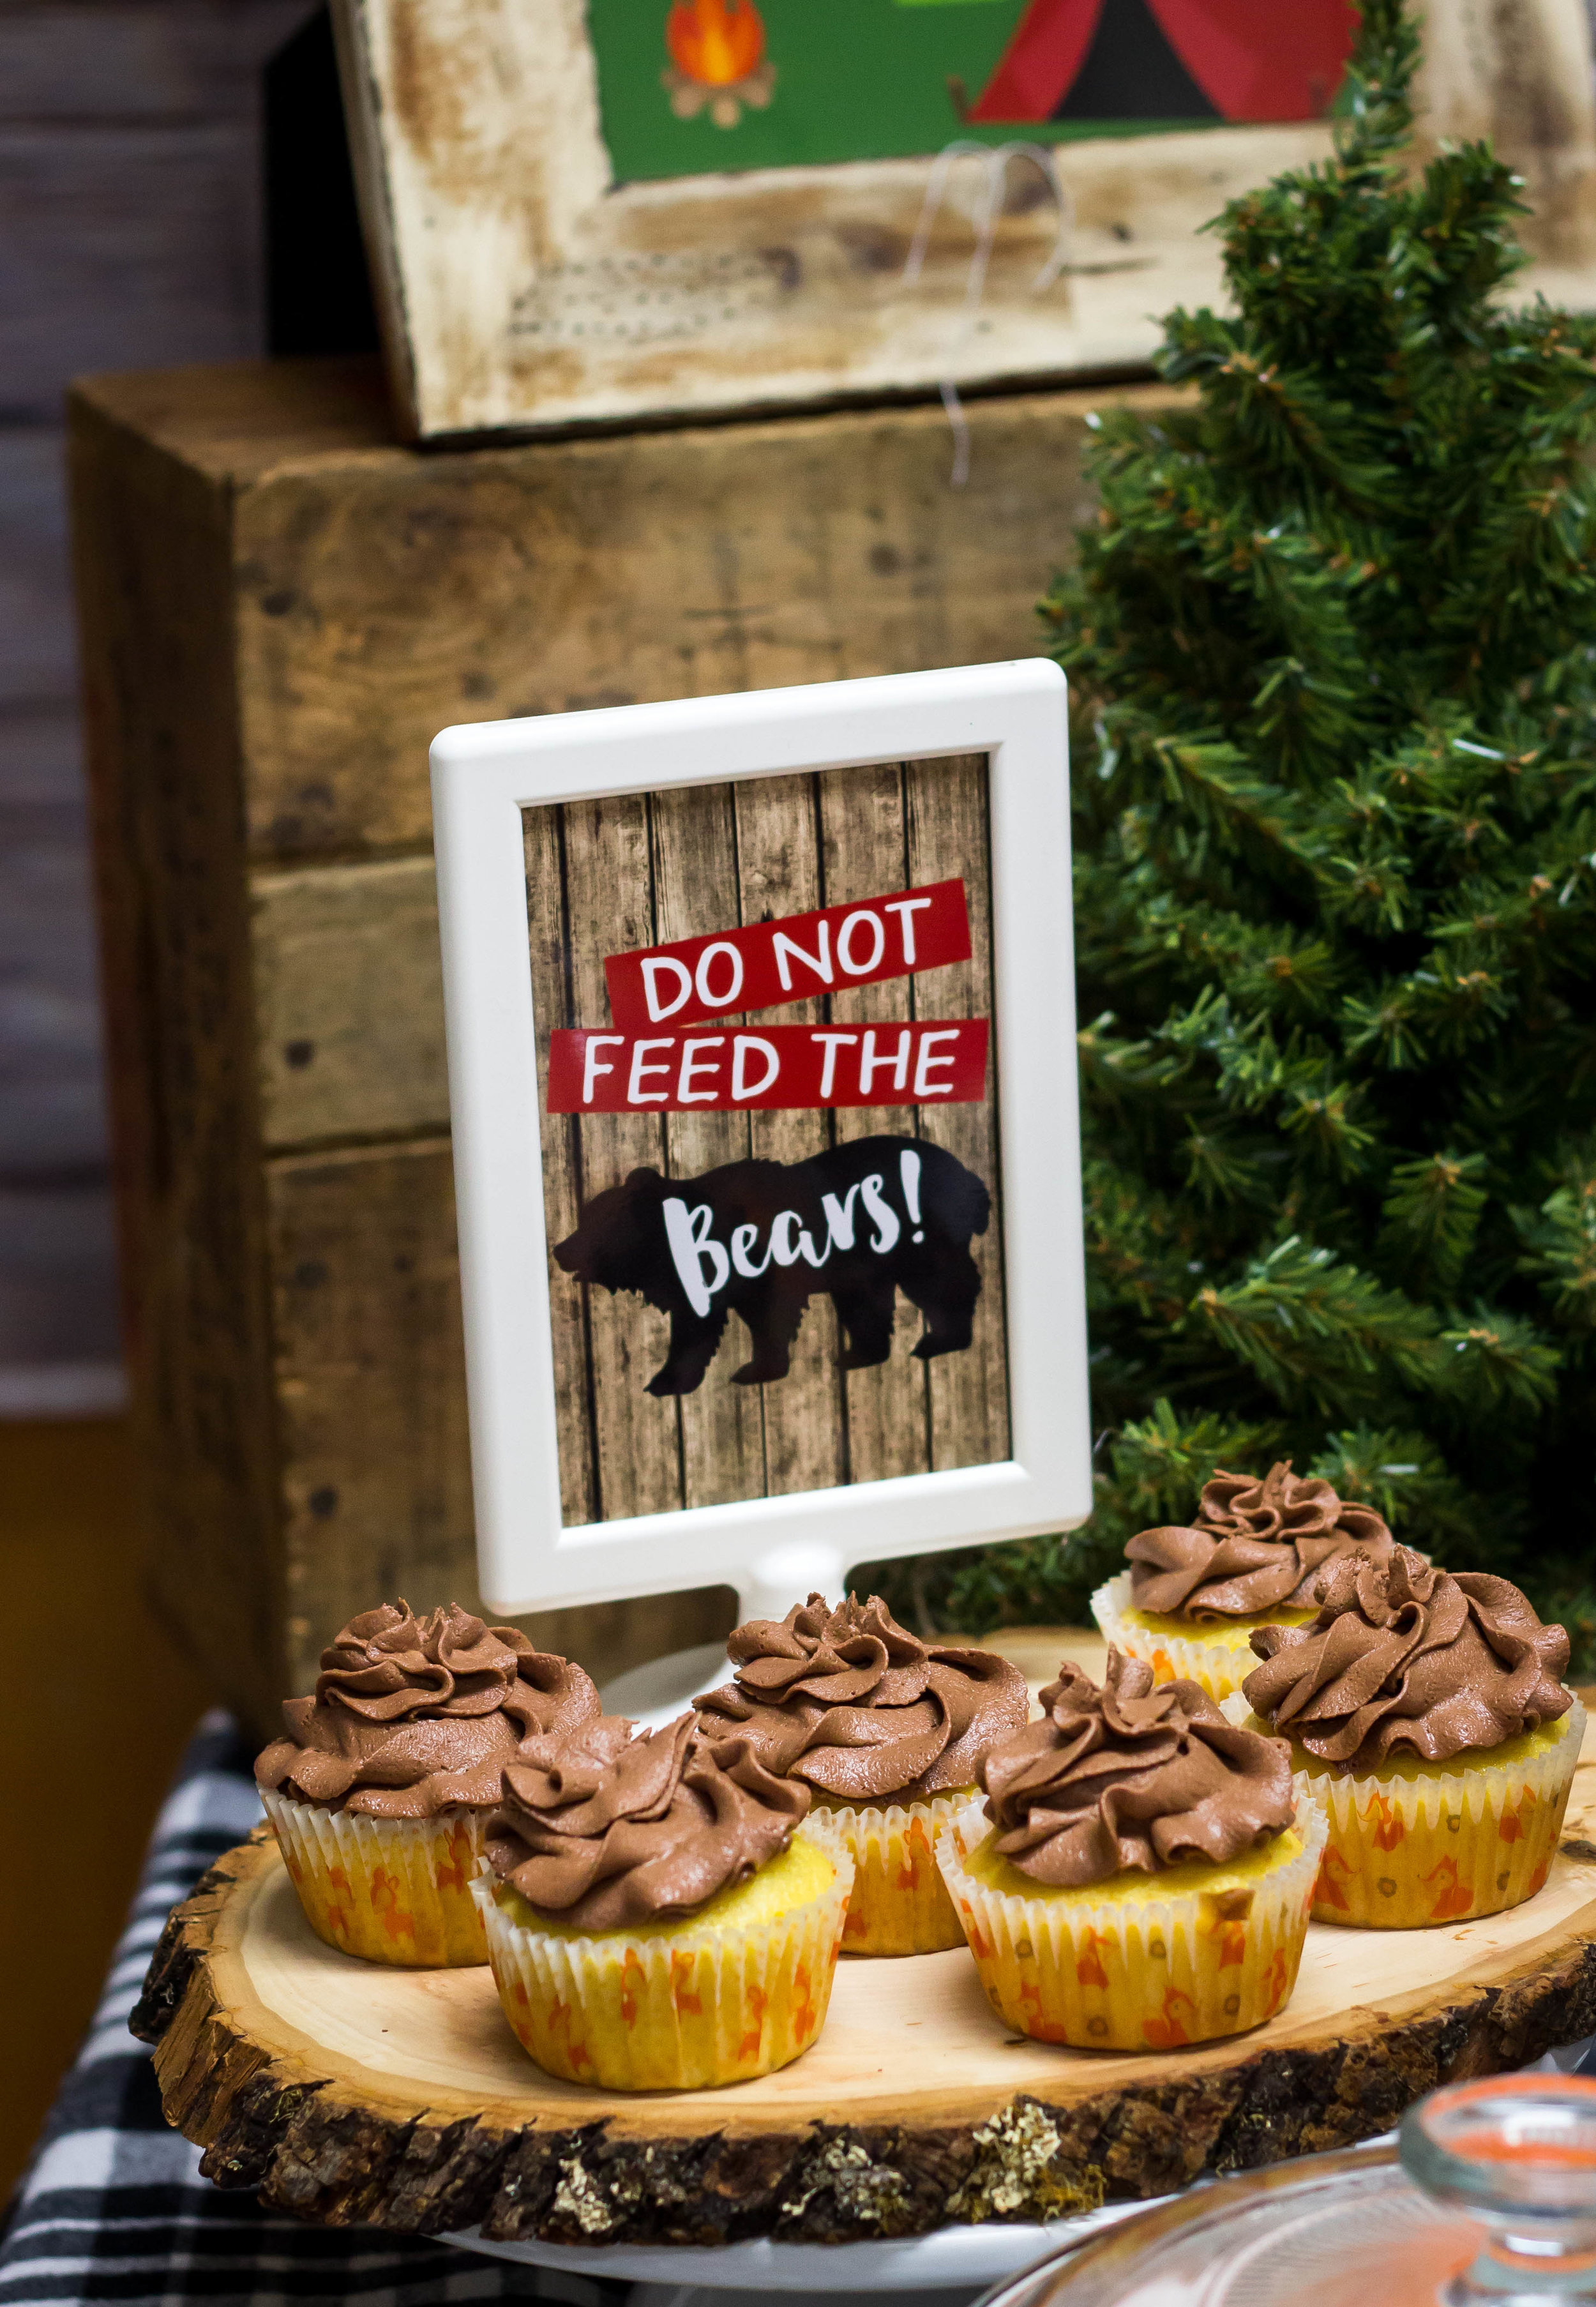 Do not feed the bears sign by MKKM Designs